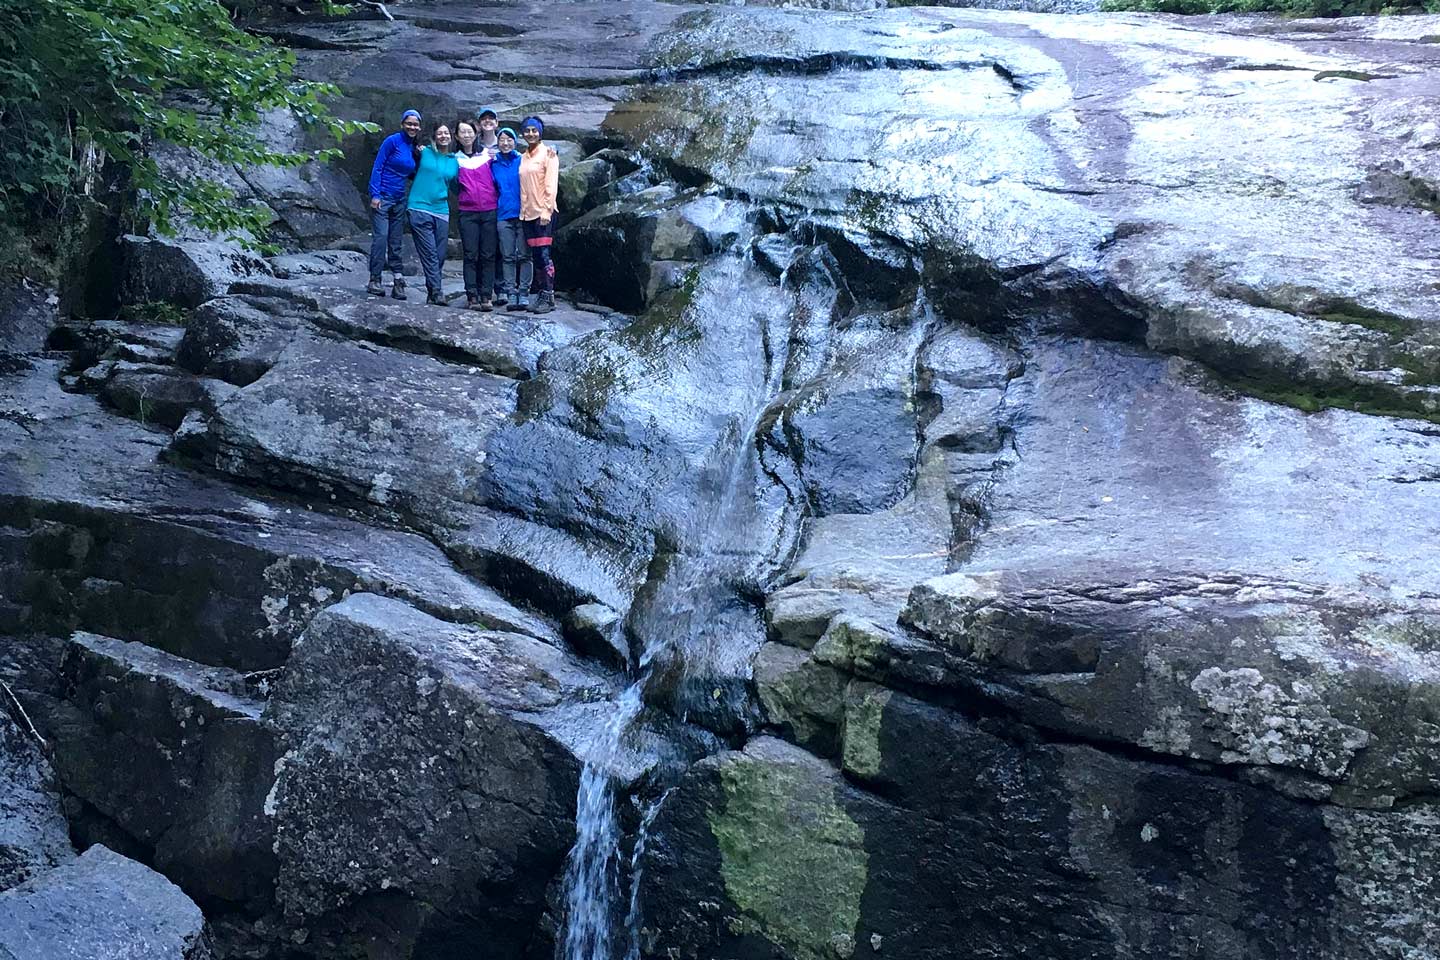 Wild Team by a Waterfall